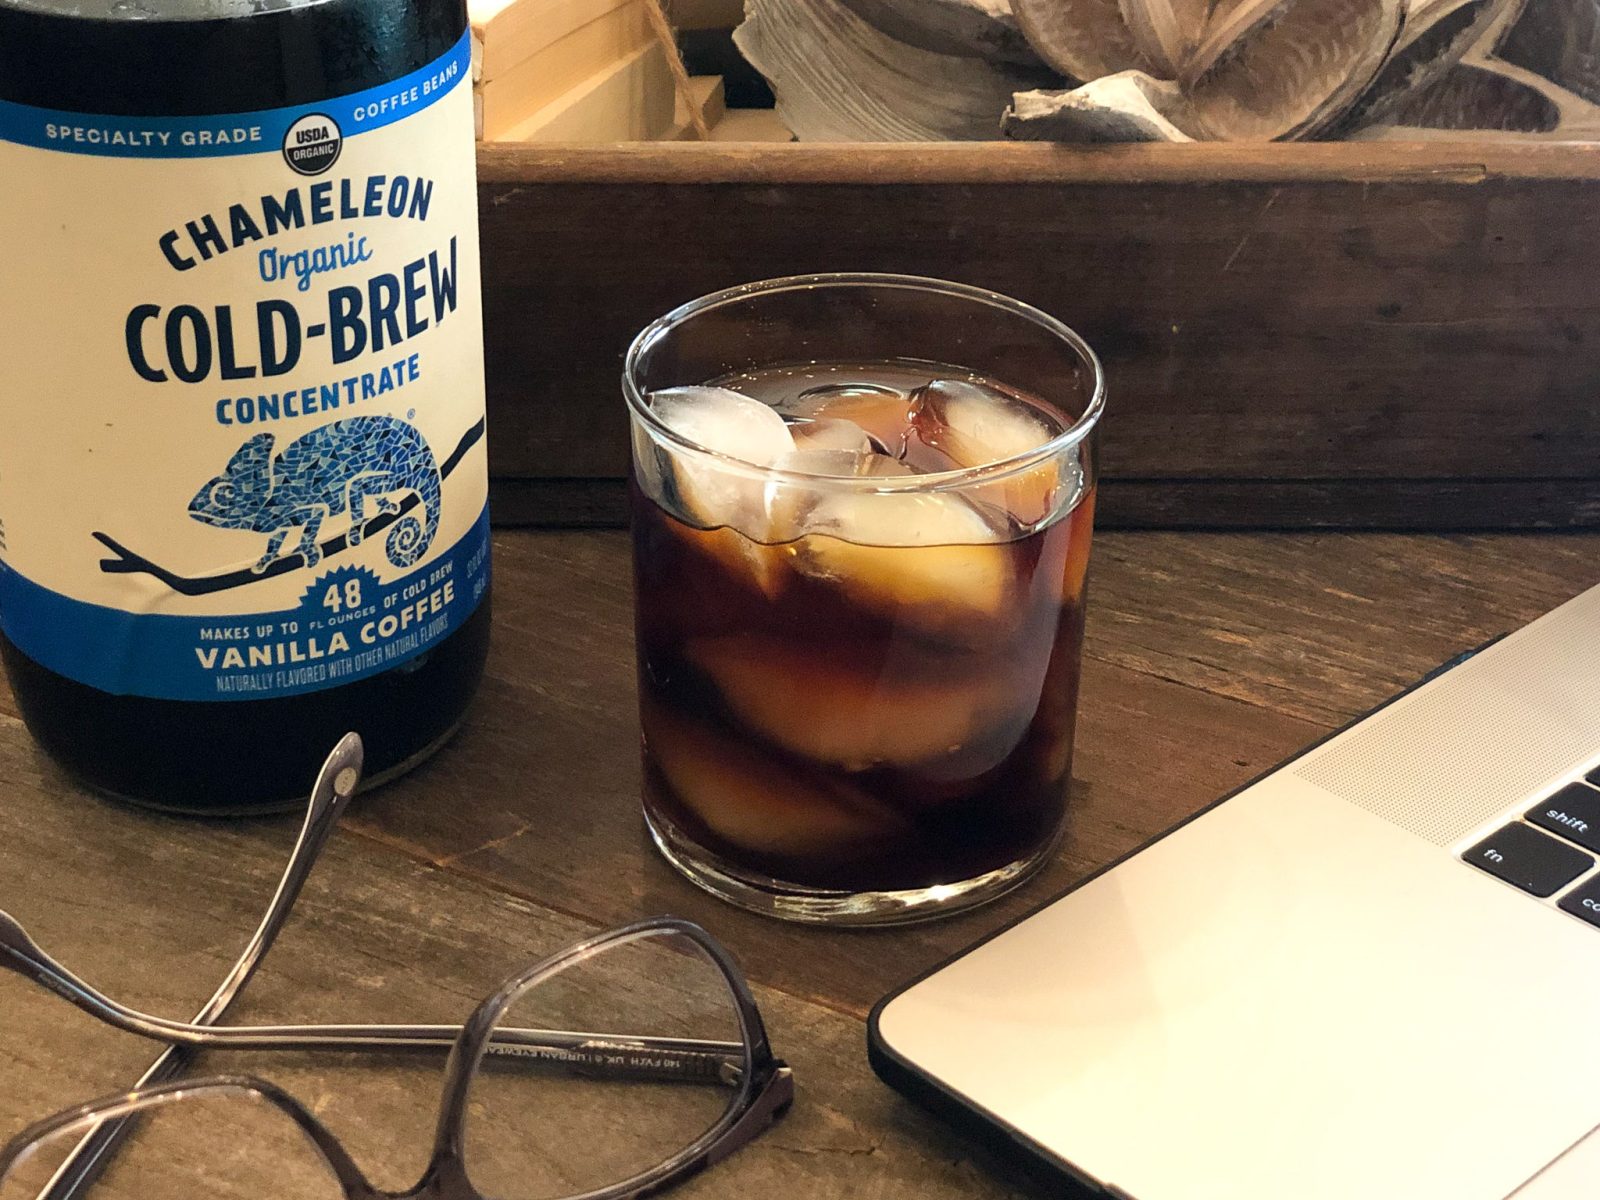 Get Ready For An Upcoming Sale On Chameleon Cold-Brew At Publix